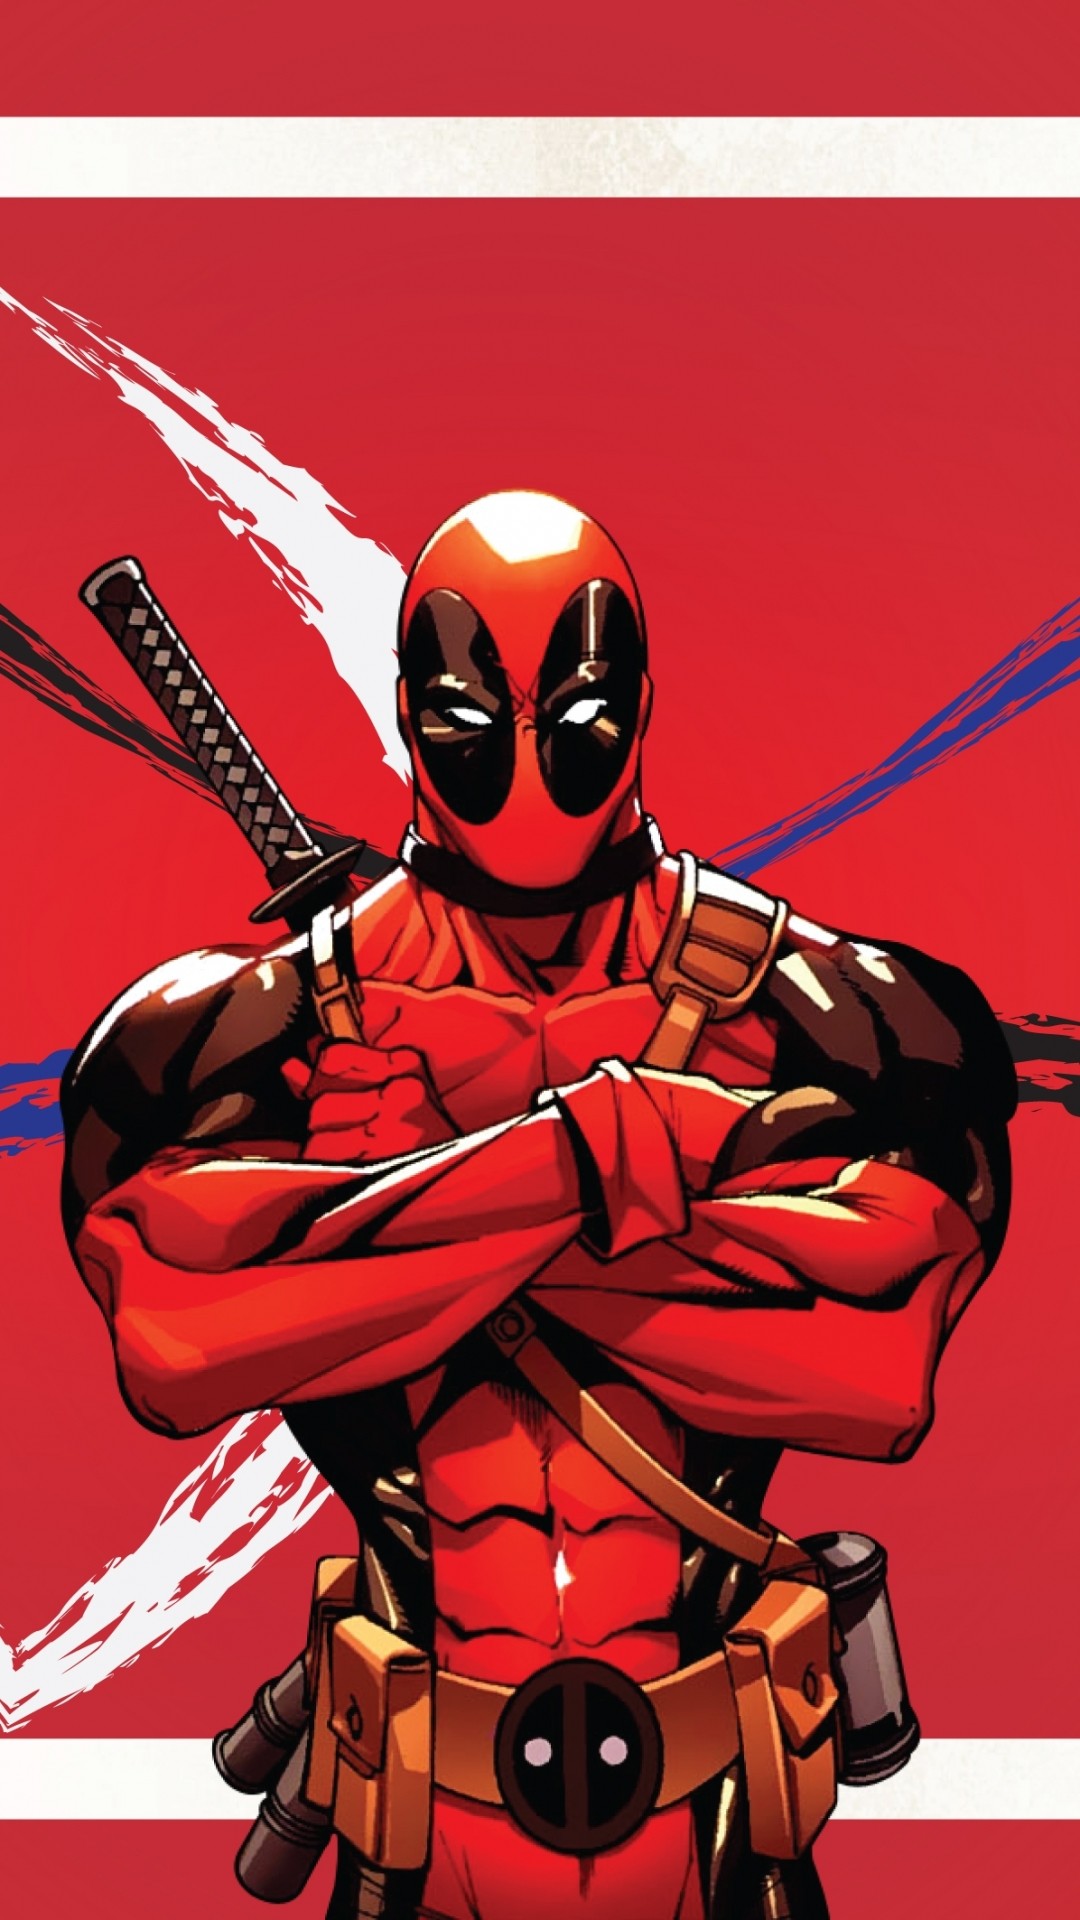 1080x1920 Deadpool Wallpapers for Iphone 7, Iphone 7 plus, Iphone 6 plus